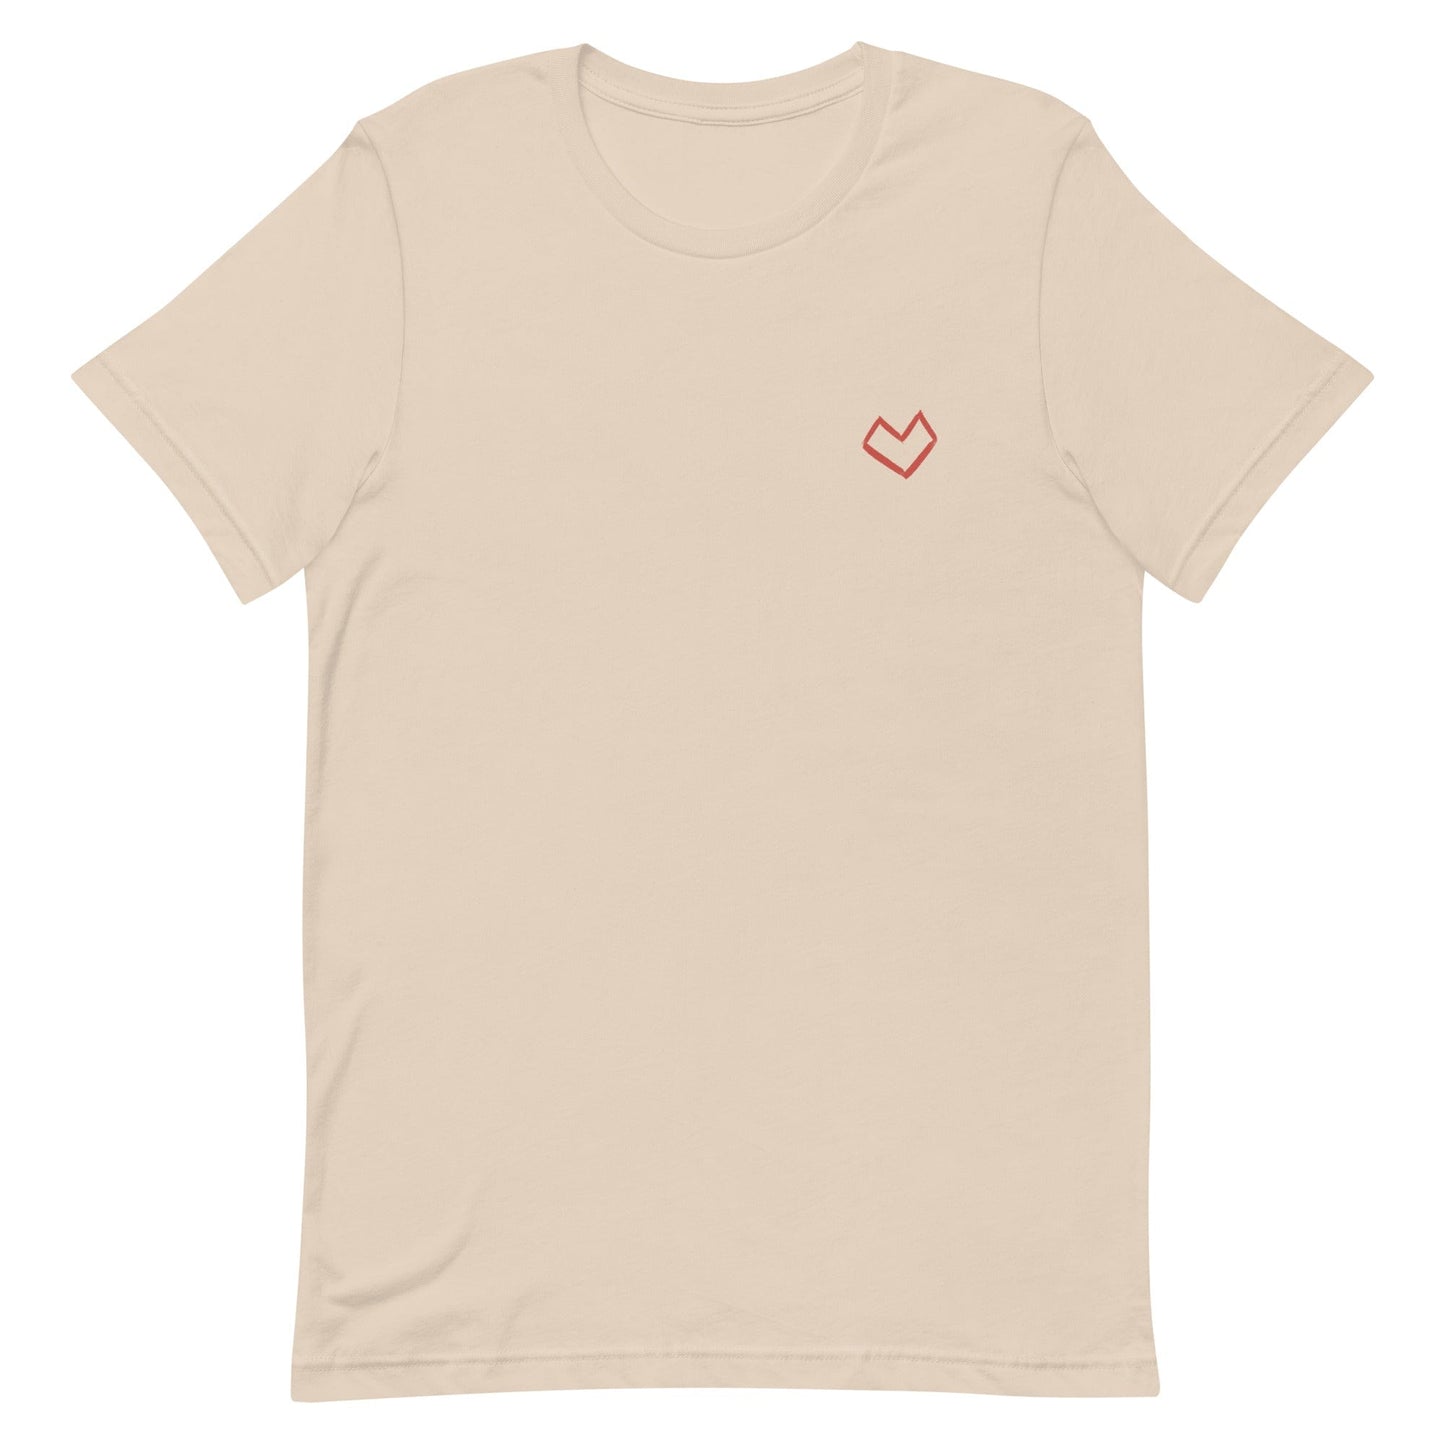 she-is-someone-feminist-t-shirt-cream-at-feminist-define-front